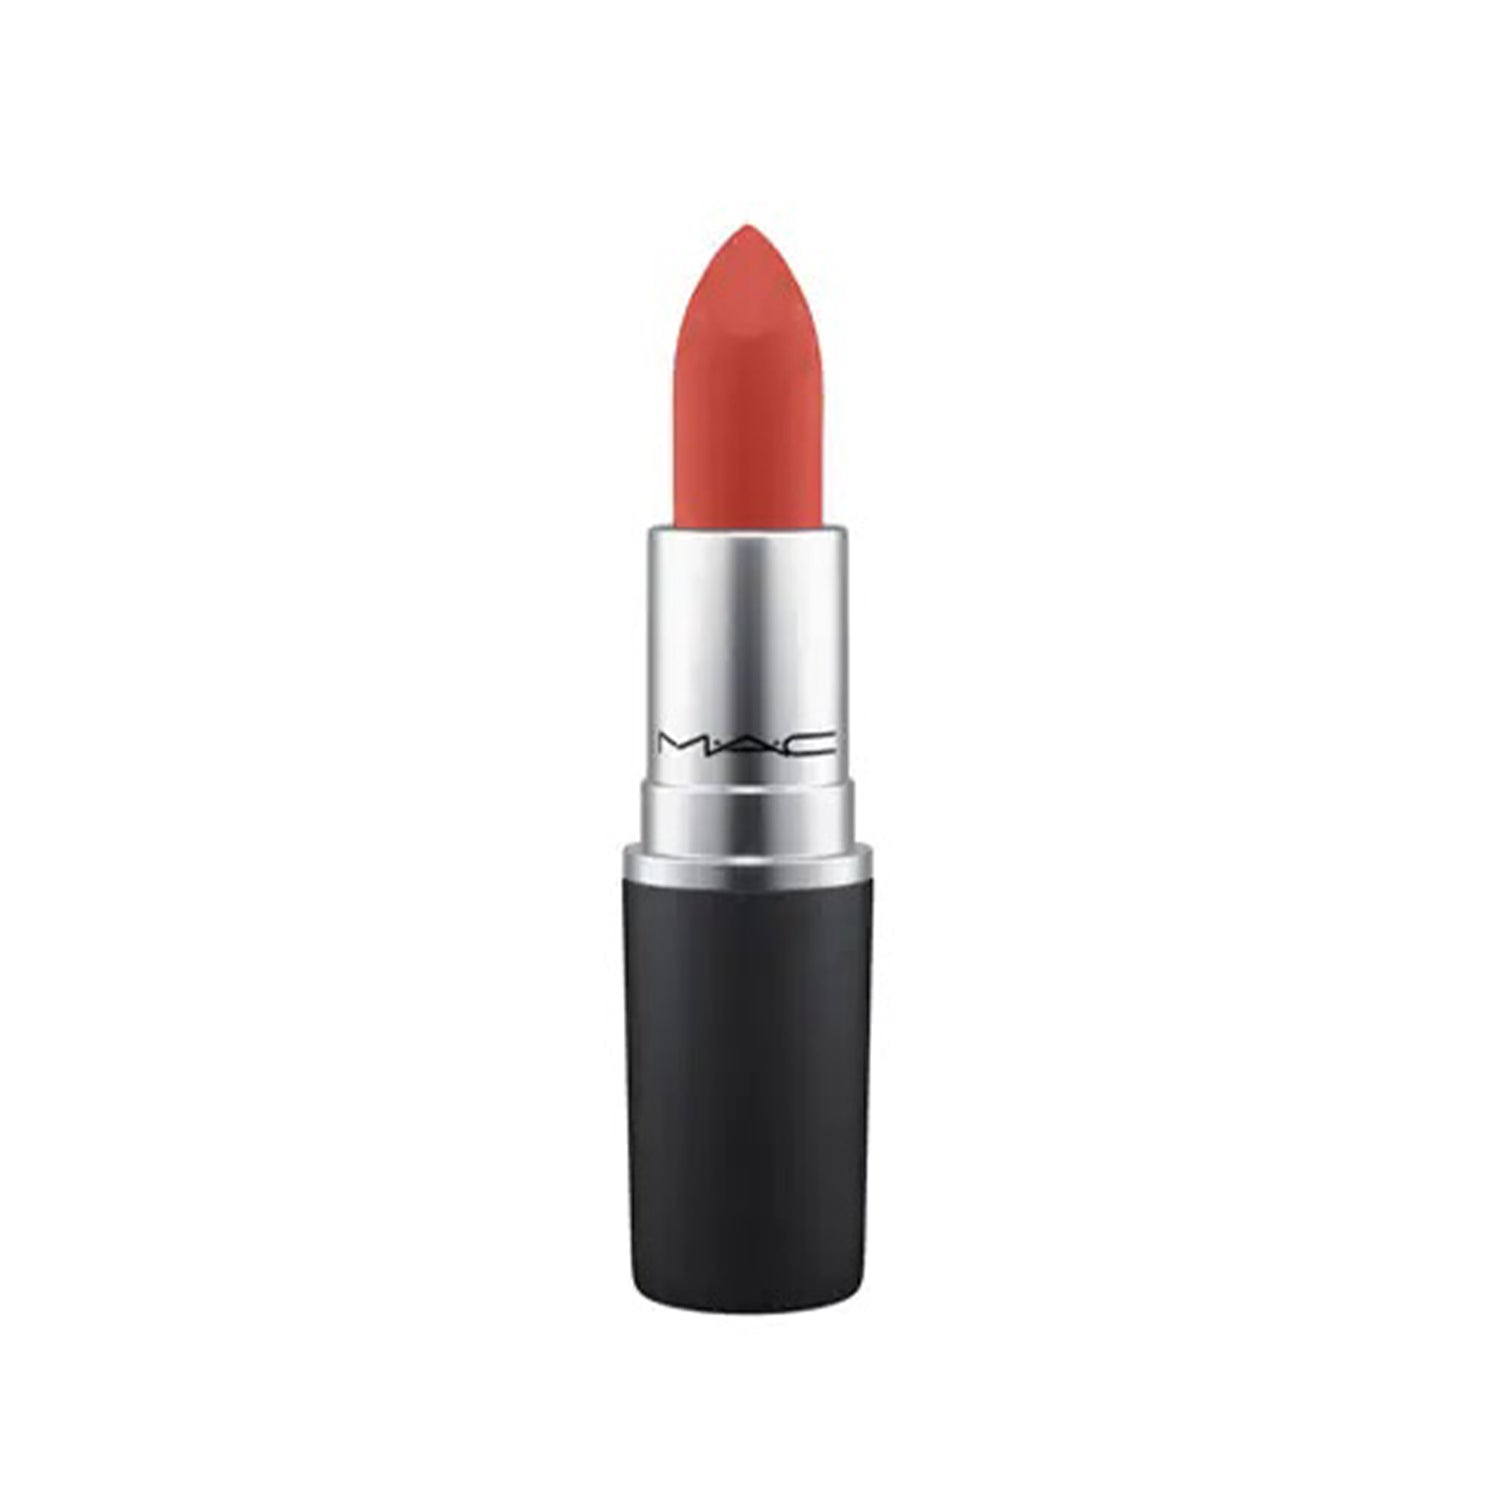 MAC Powder Kiss Lipstick - Devoted to Chilli available at Heygirl.pk for delivery in Karachi, Lahore, Islamabad across Pakistan. 